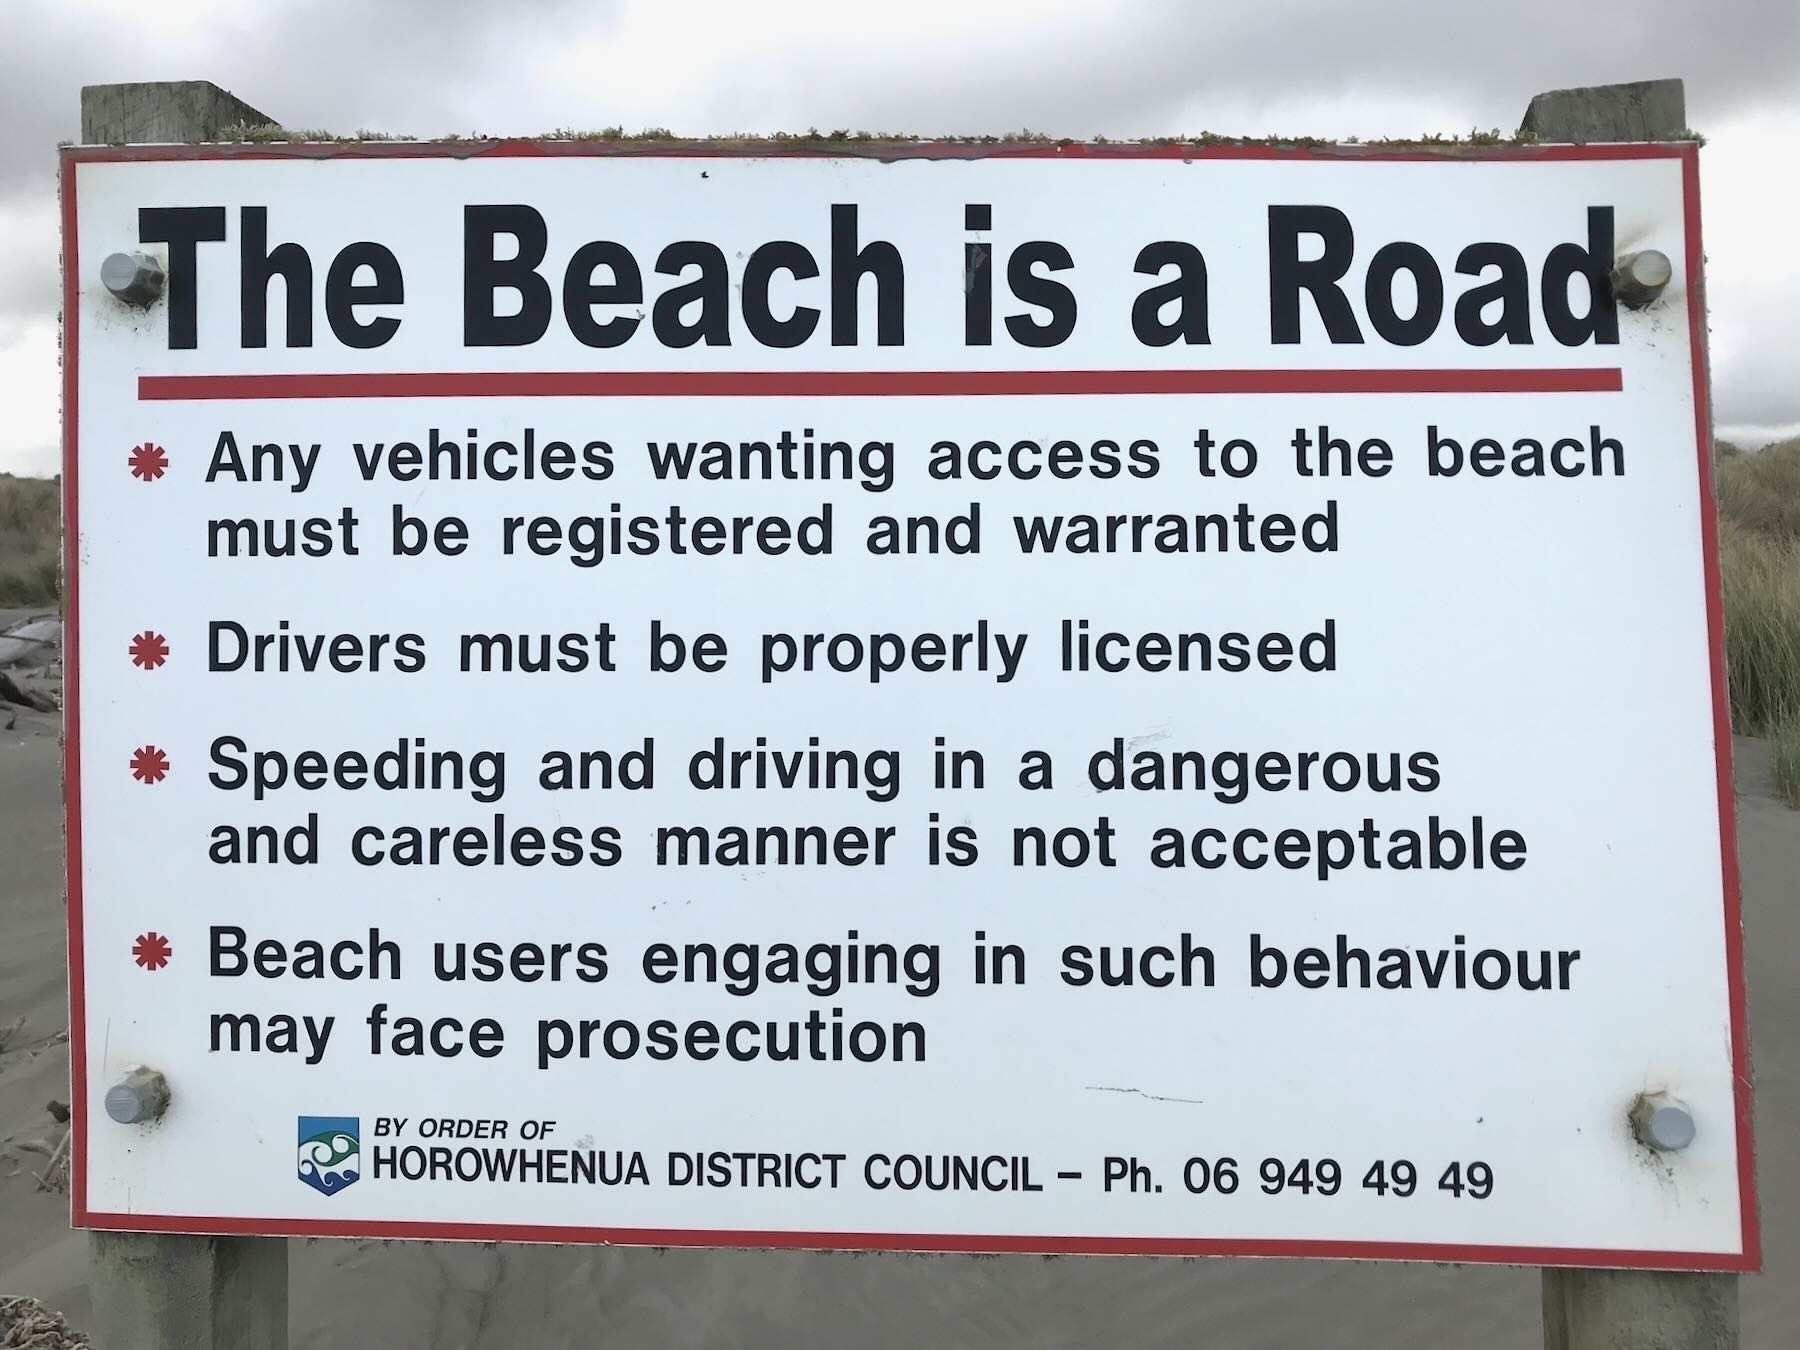 The beach is a road, sign on beach. 